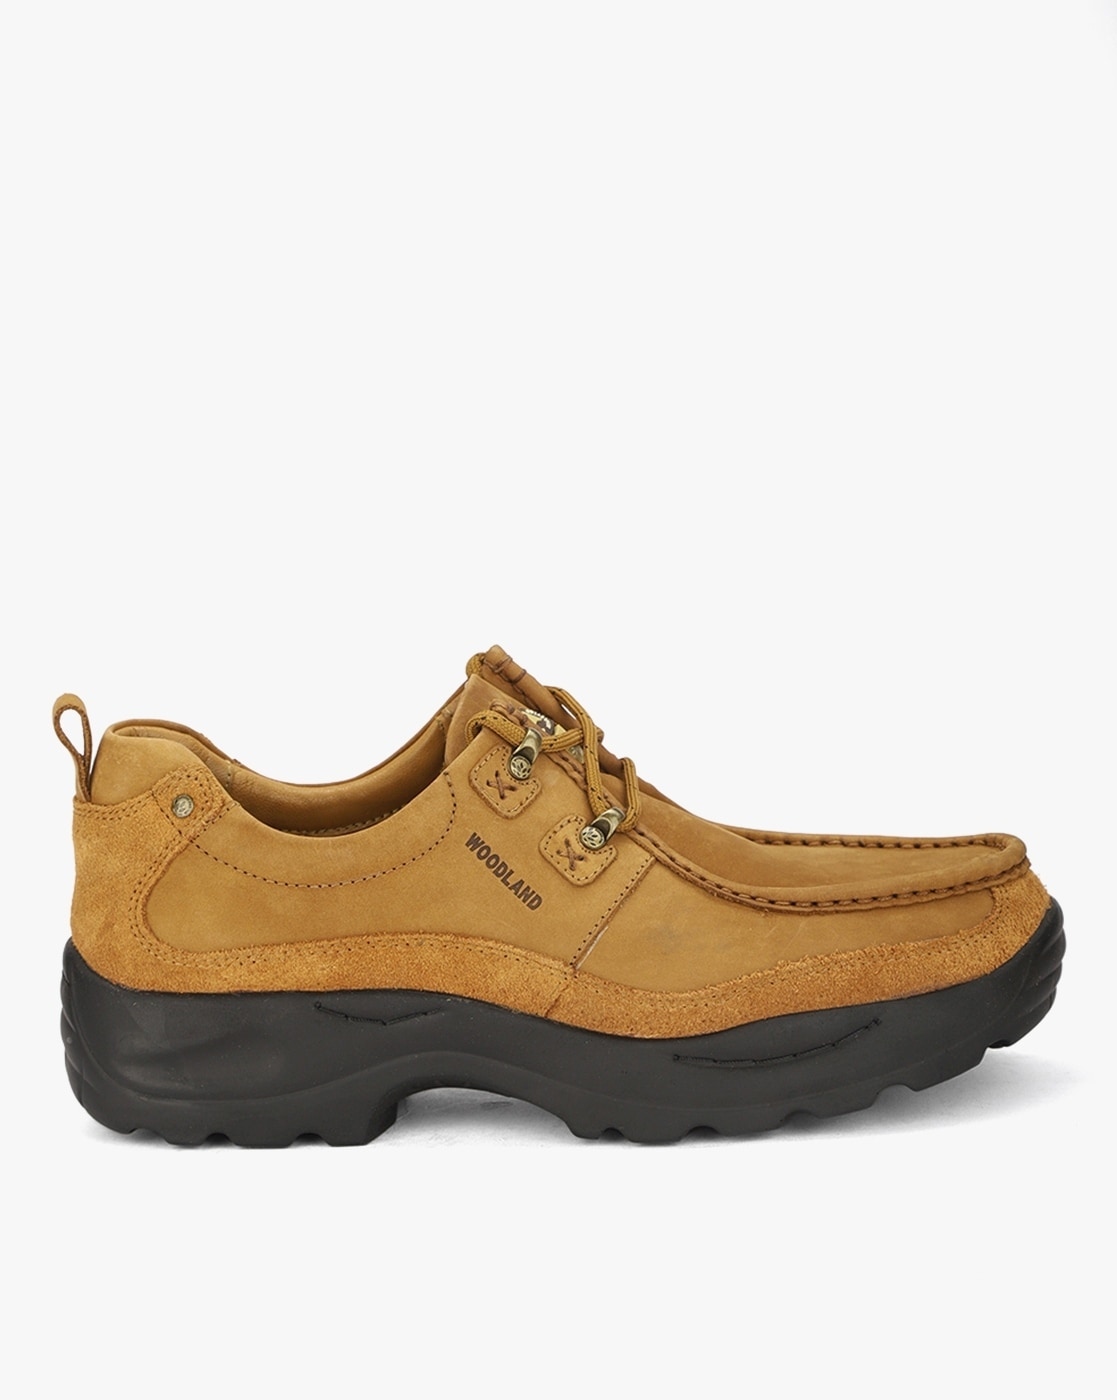 Casual rust Woodland Shoes at best price in Agra | ID: 23332129891-saigonsouth.com.vn